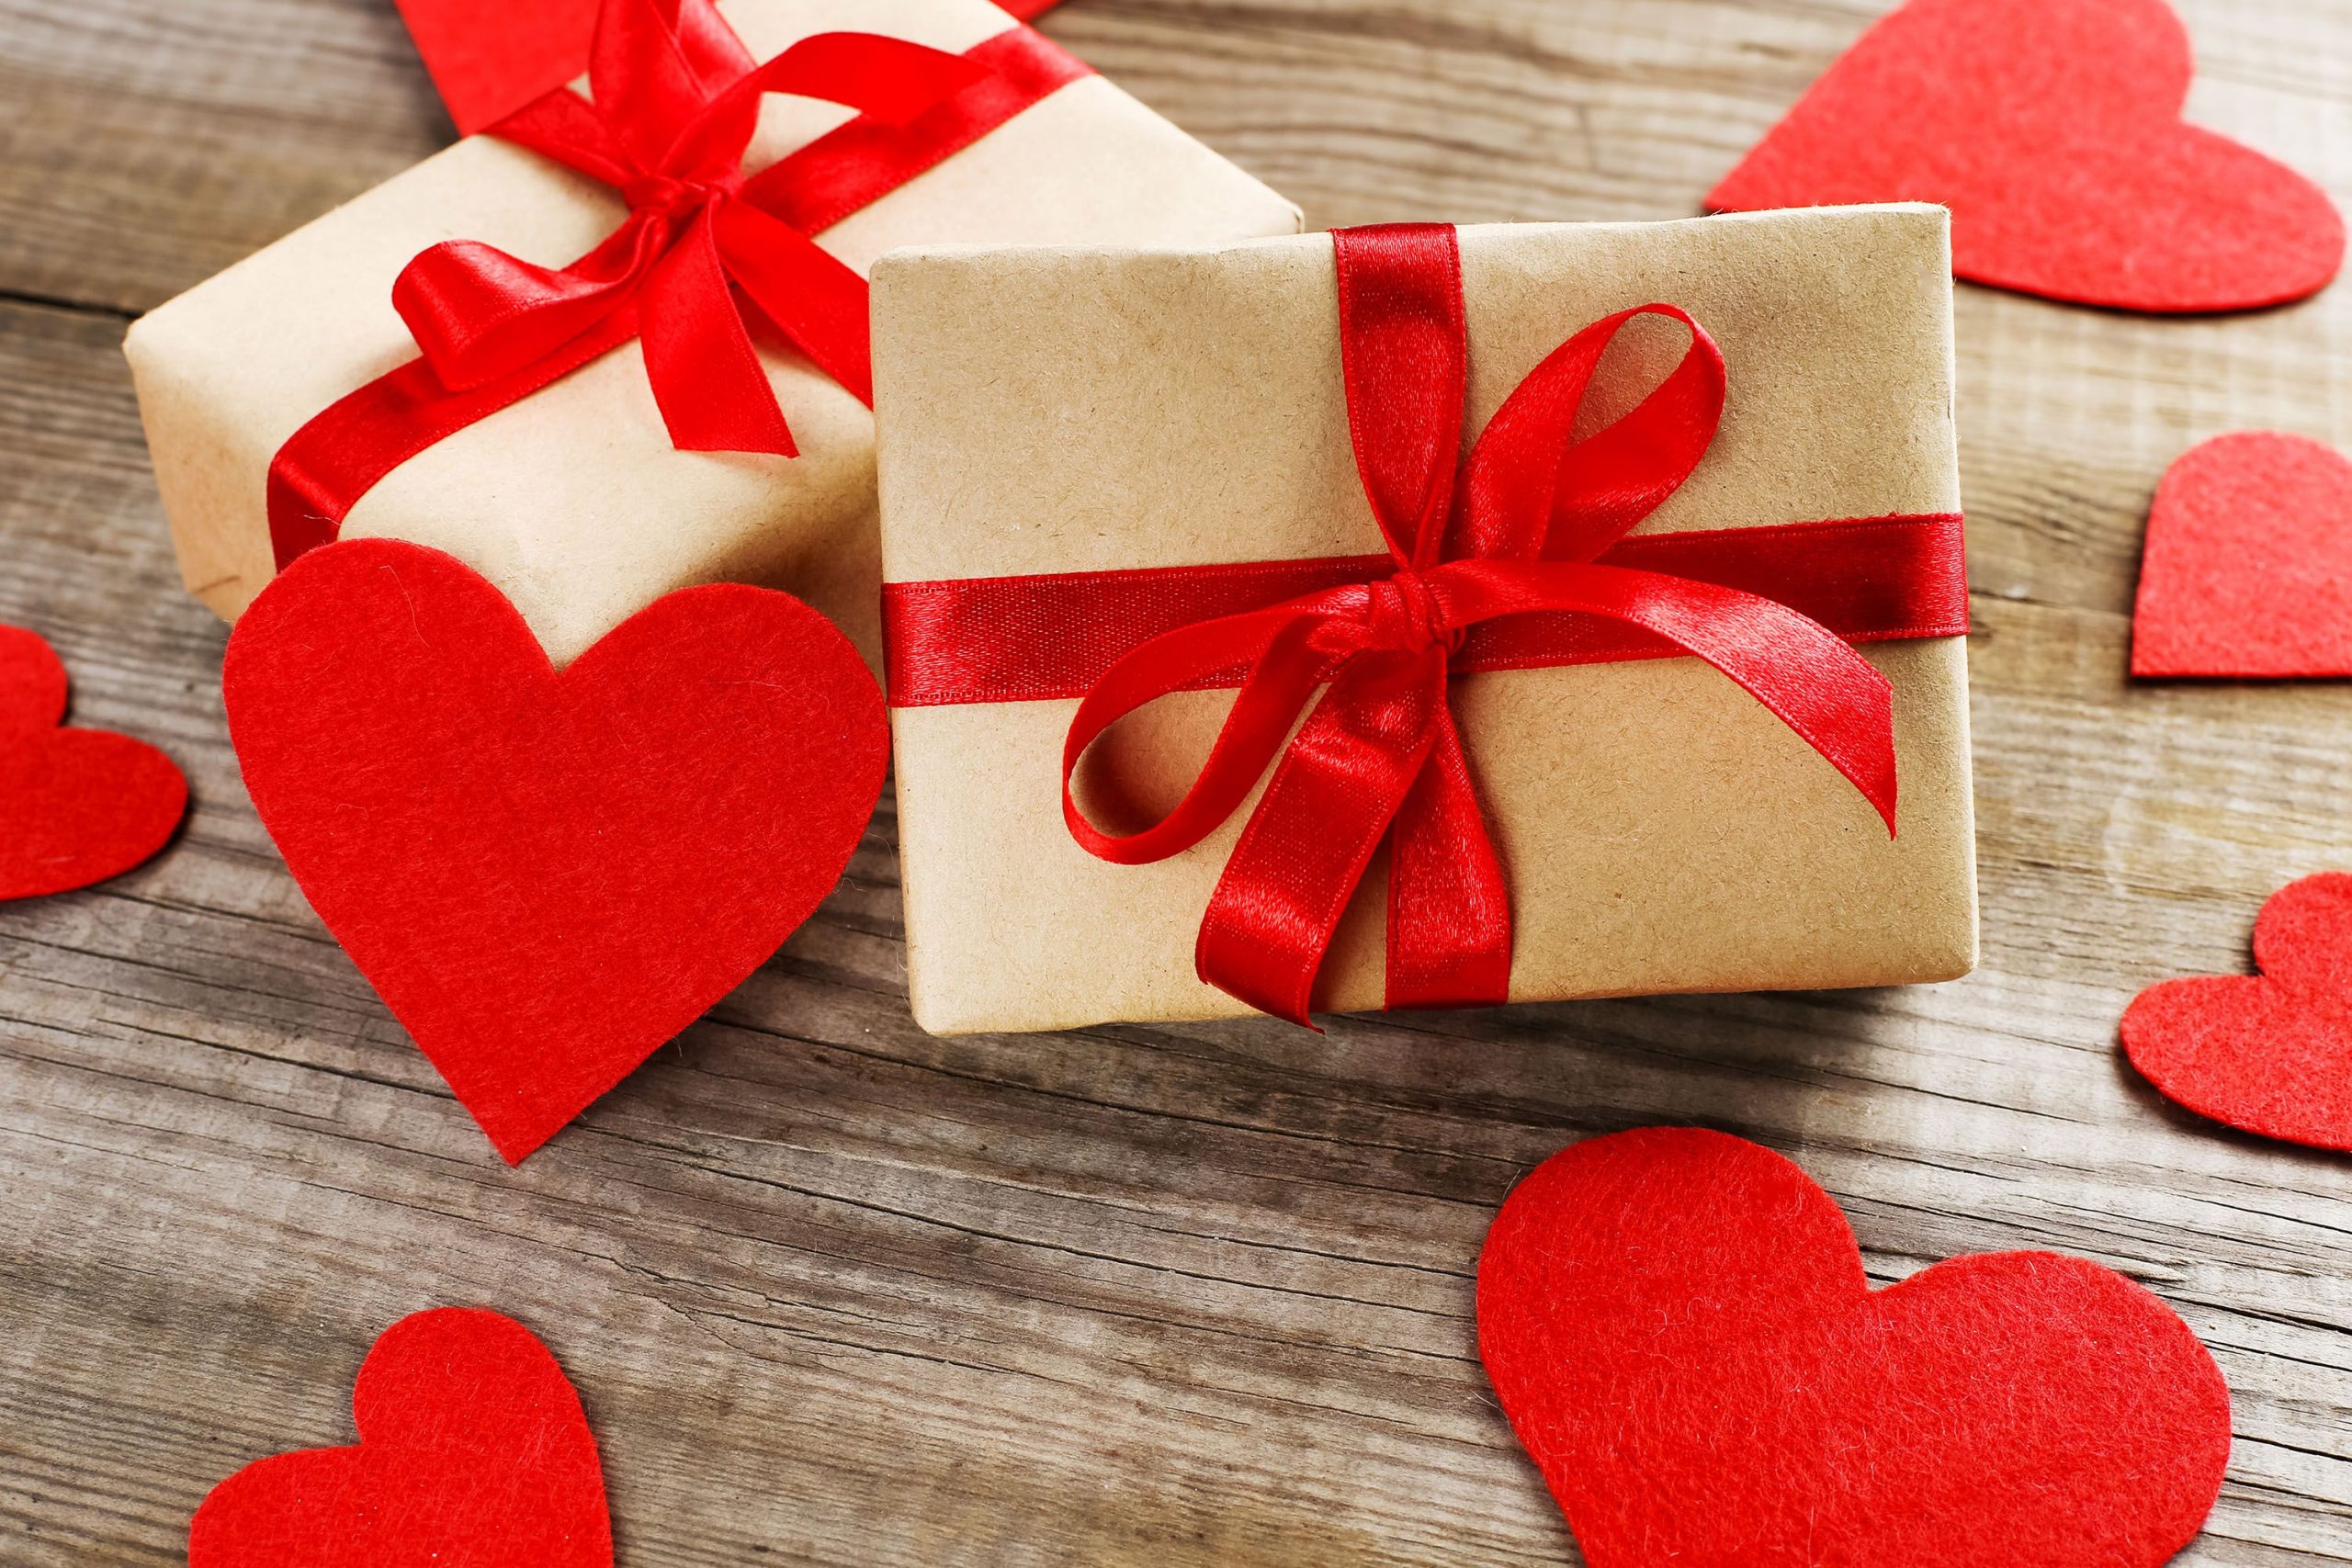 Expressing Love with Thoughtful Gifts: Tips for Valentine's Day